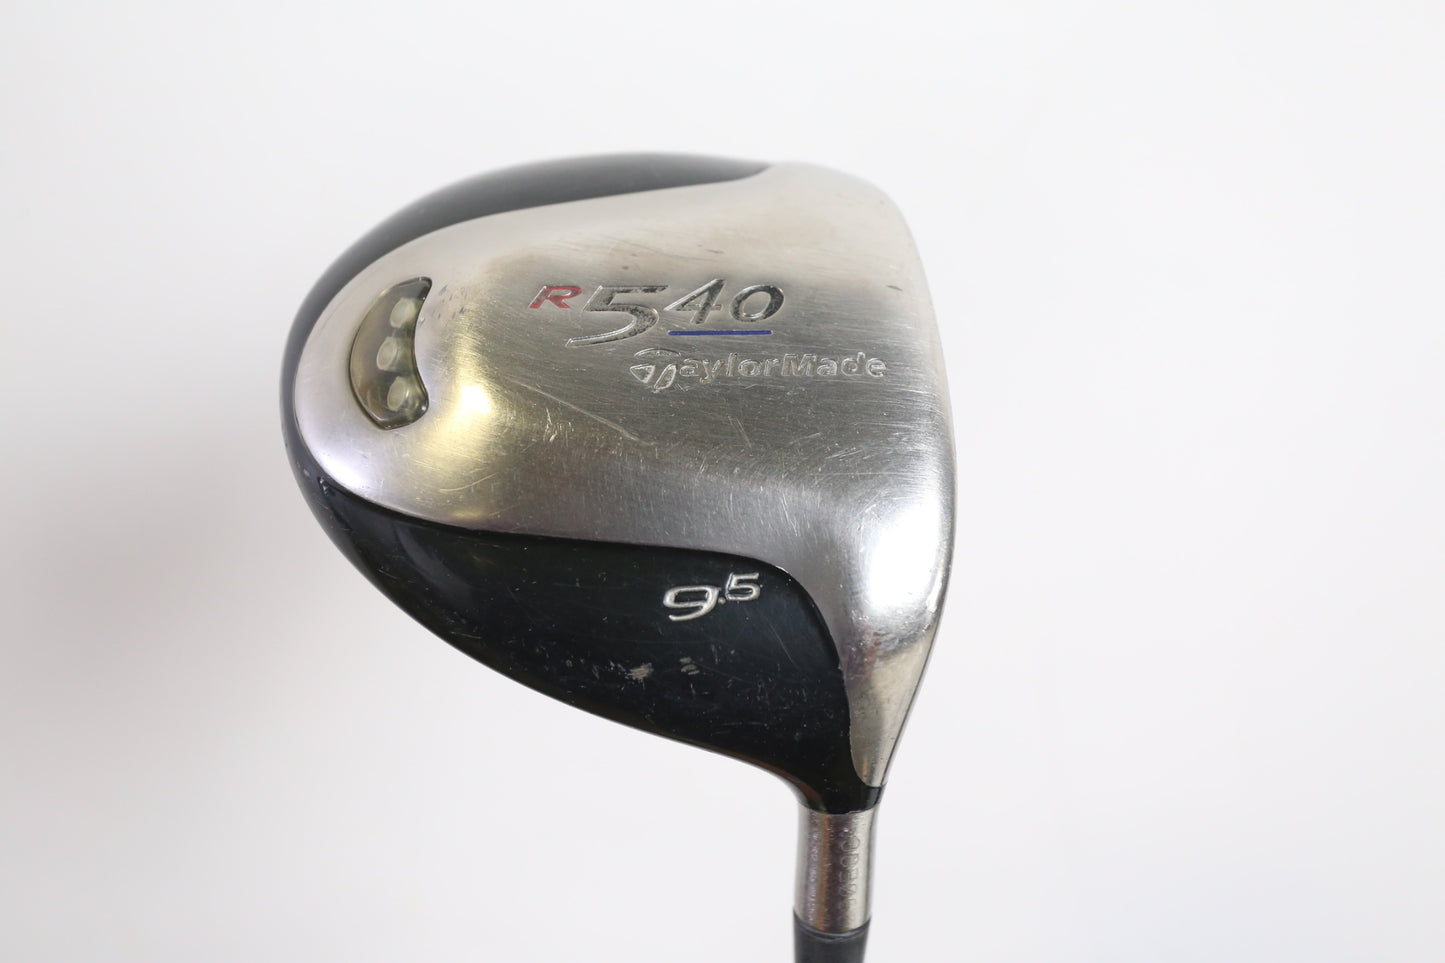 Used TaylorMade R540 Driver - Right-Handed - 9.5 Degrees - Regular Flex